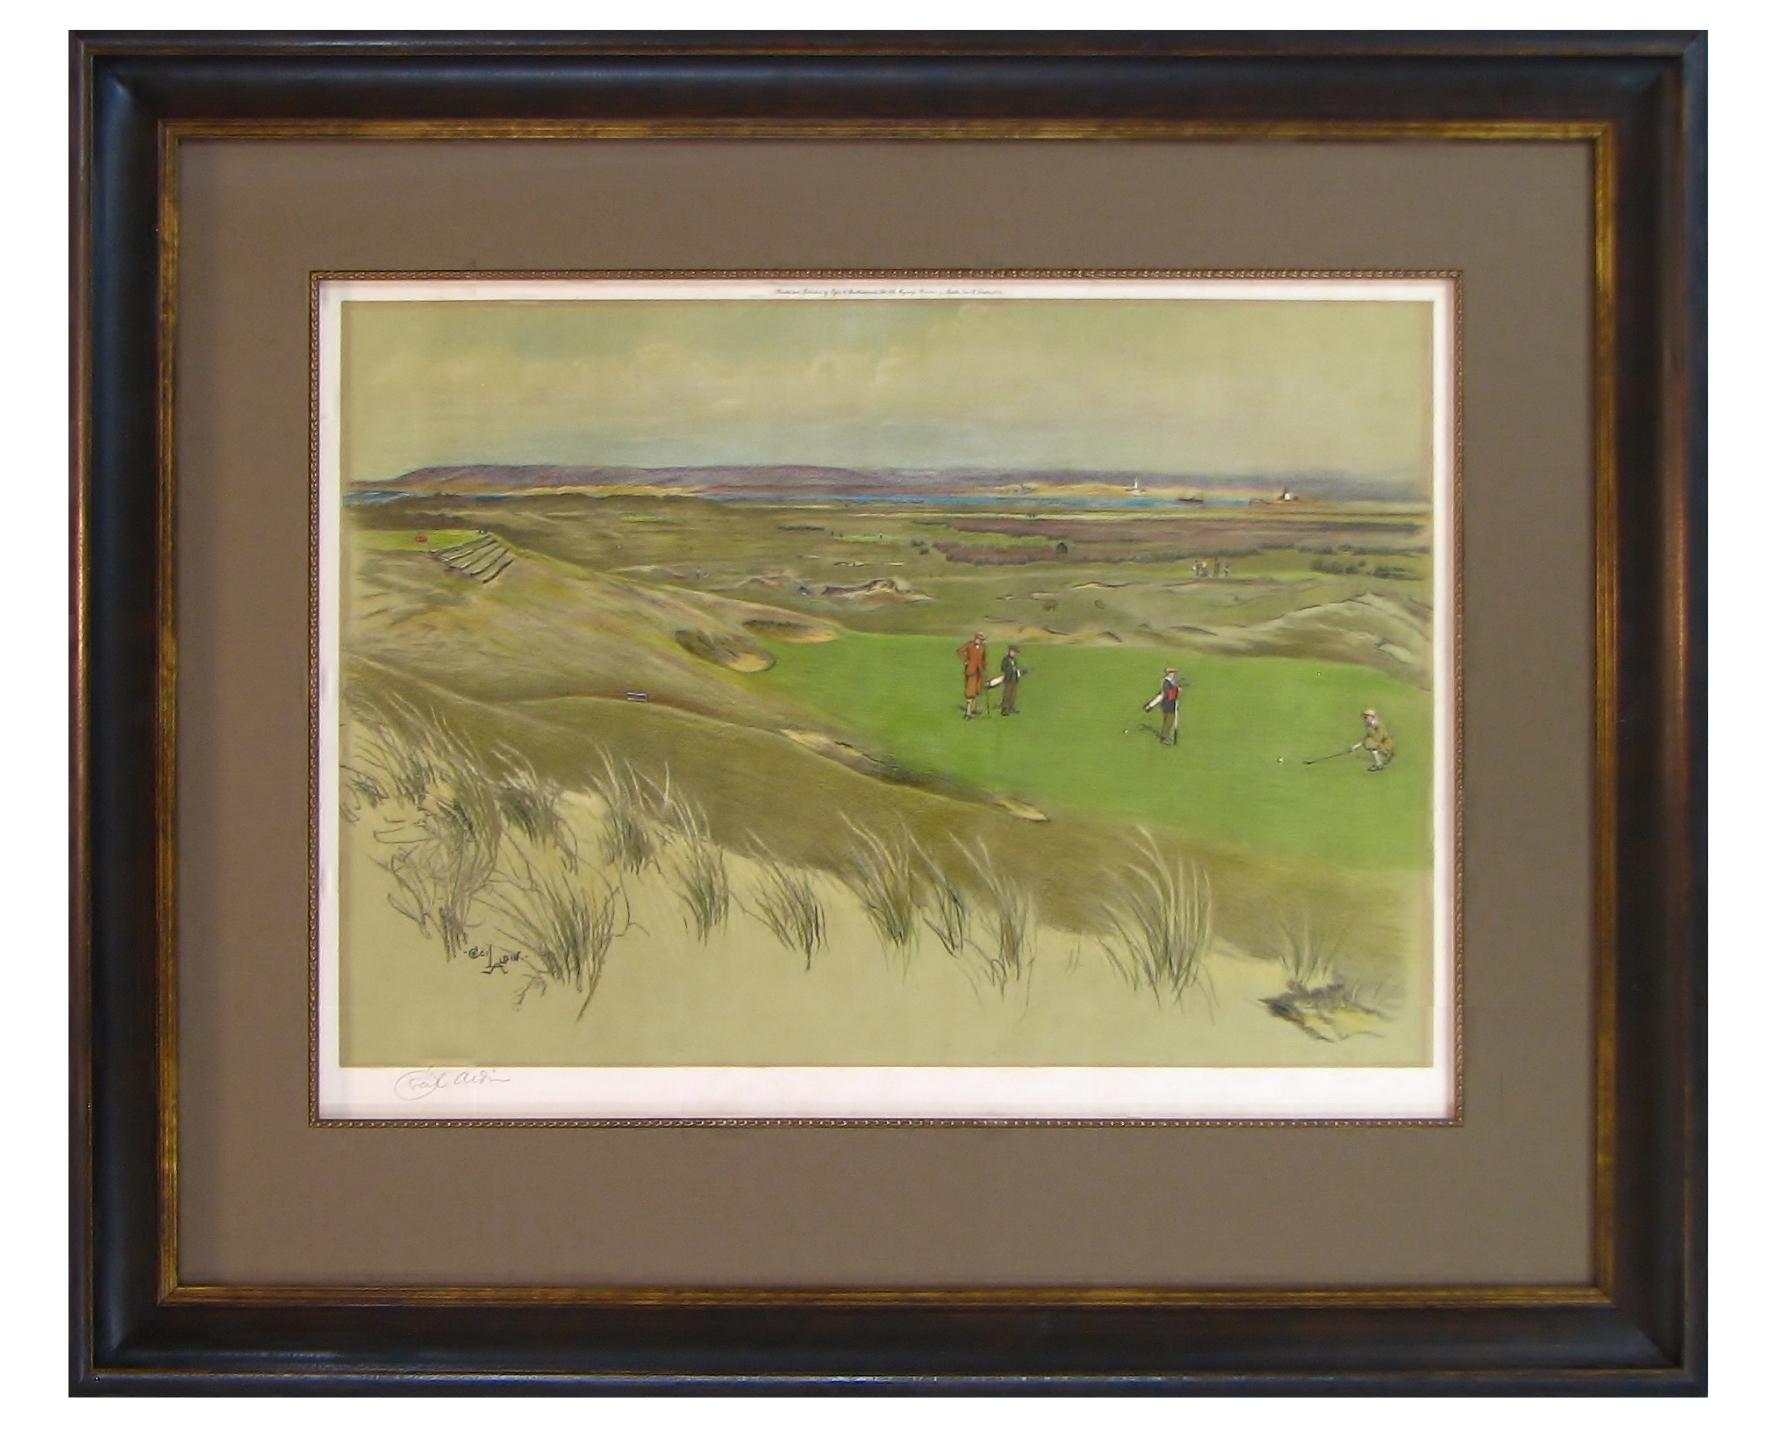 This is a signed color photolithograph by Cecil Aldin, depicting the English golf course Royal North Devon at Westward Ho!. The photolithograph depicts golfers on the course’s sixth green. Royal North Devon at Westward Ho! can rightly claim to be